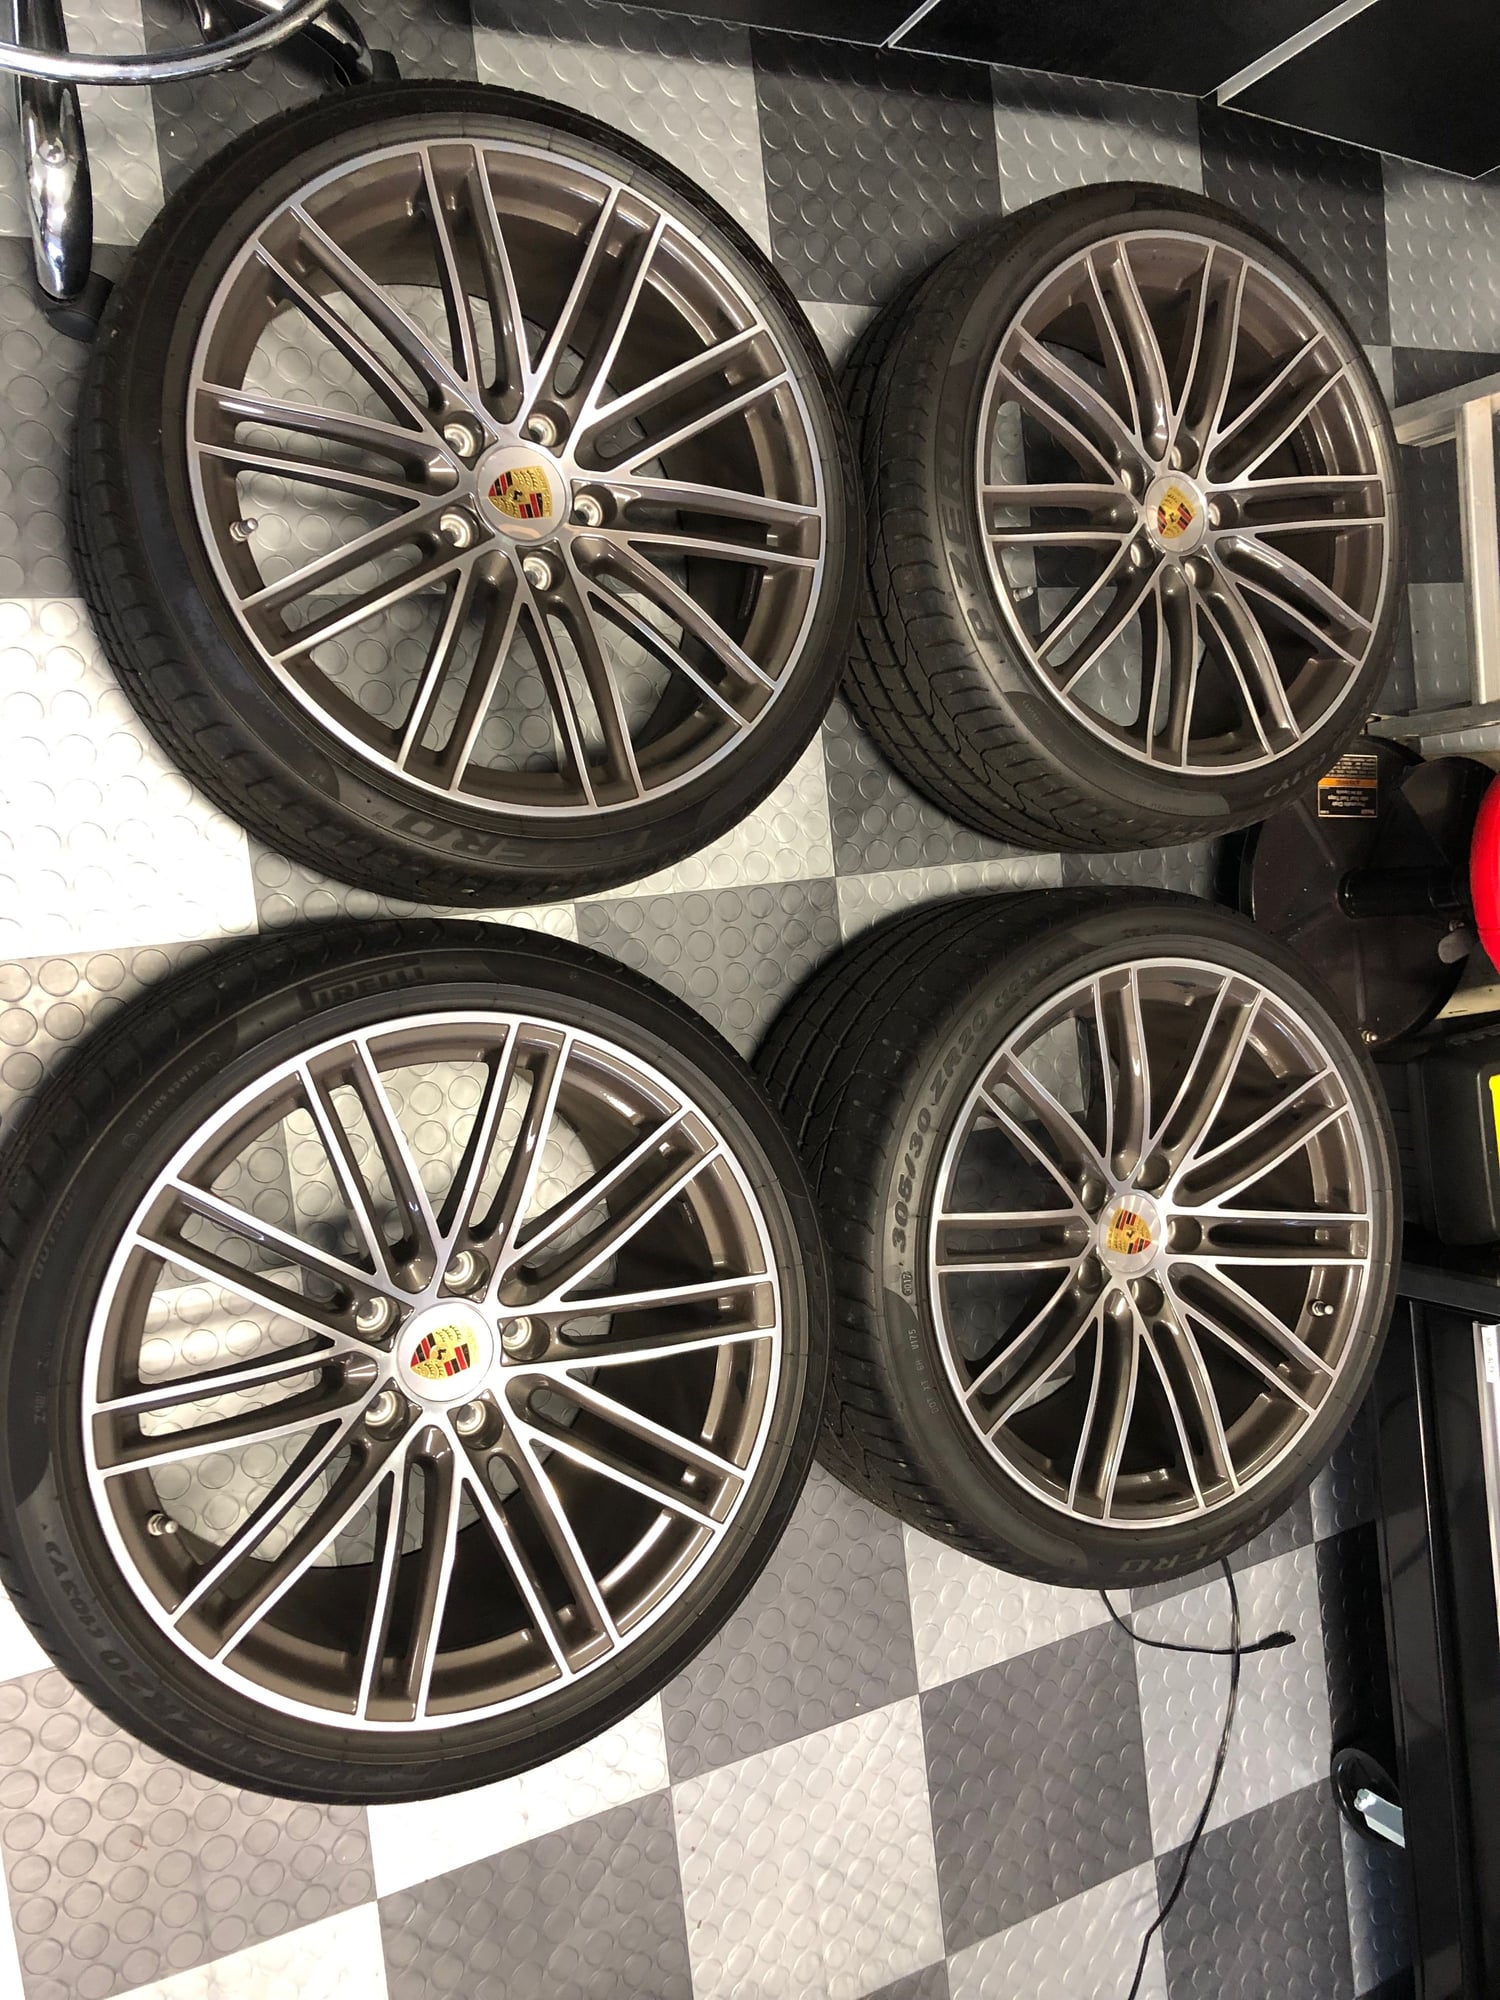 Wheels and Tires/Axles - OEM 991 Porsche Turbo Wheels, Tires, TPMS and Center Caps 710 Miles - Used - 2014 to 2019 Porsche 911 - Davie, FL 33330, United States